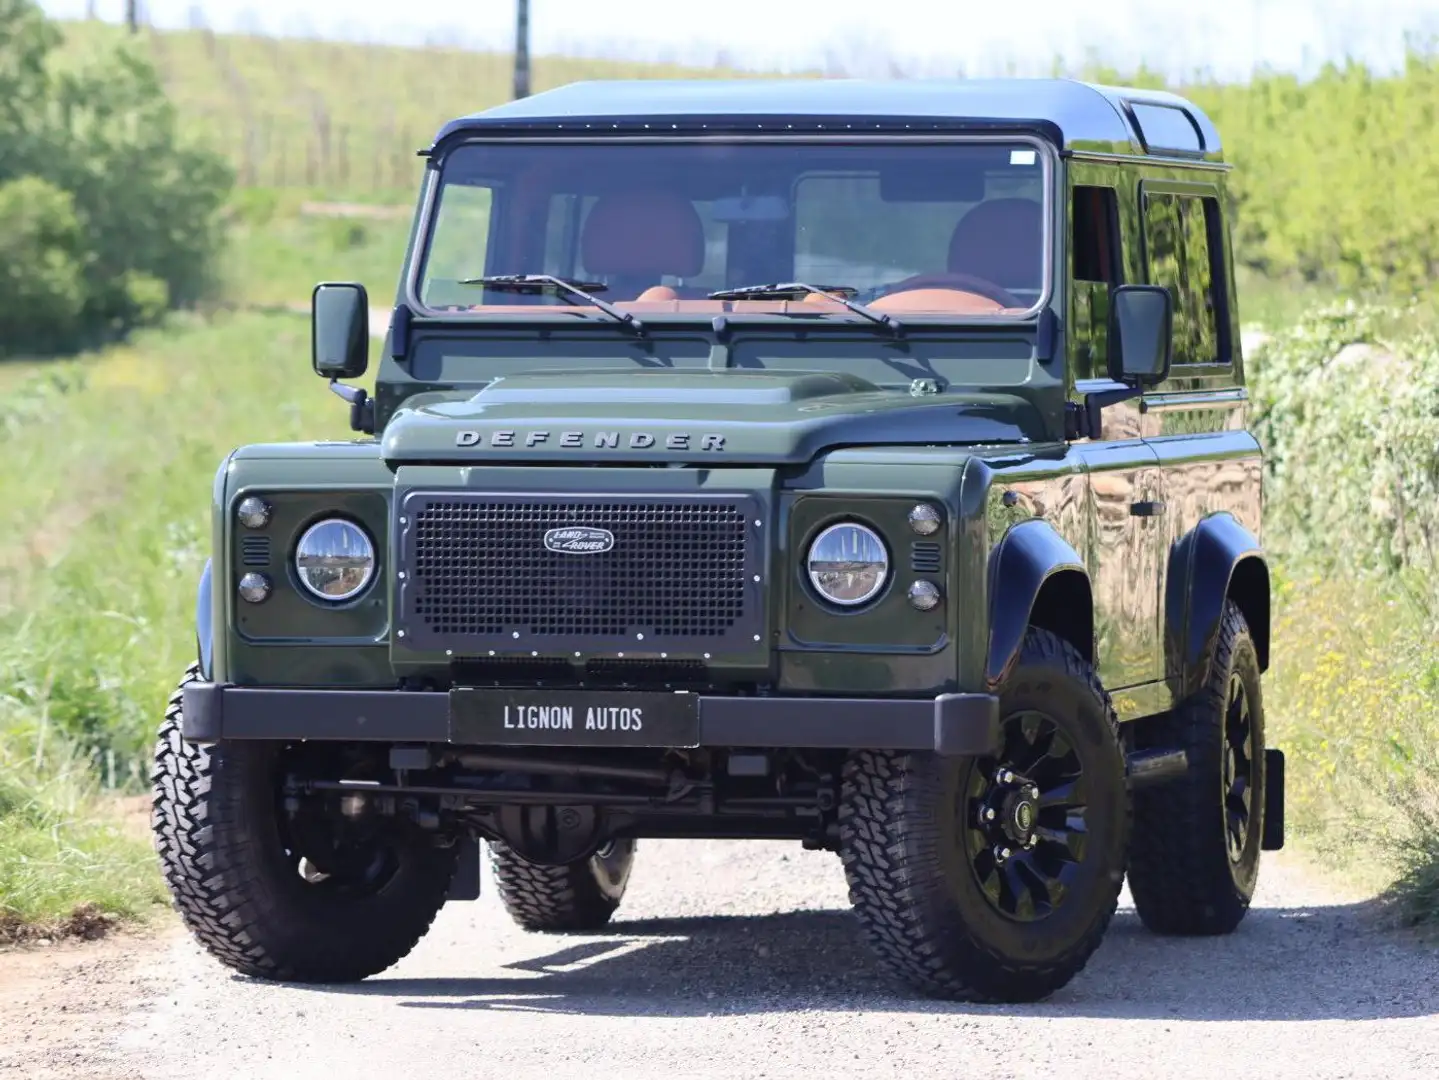 Land Rover Defender 90 Td4 2.2 SW 4 Places "Hunter Green" Zielony - 1